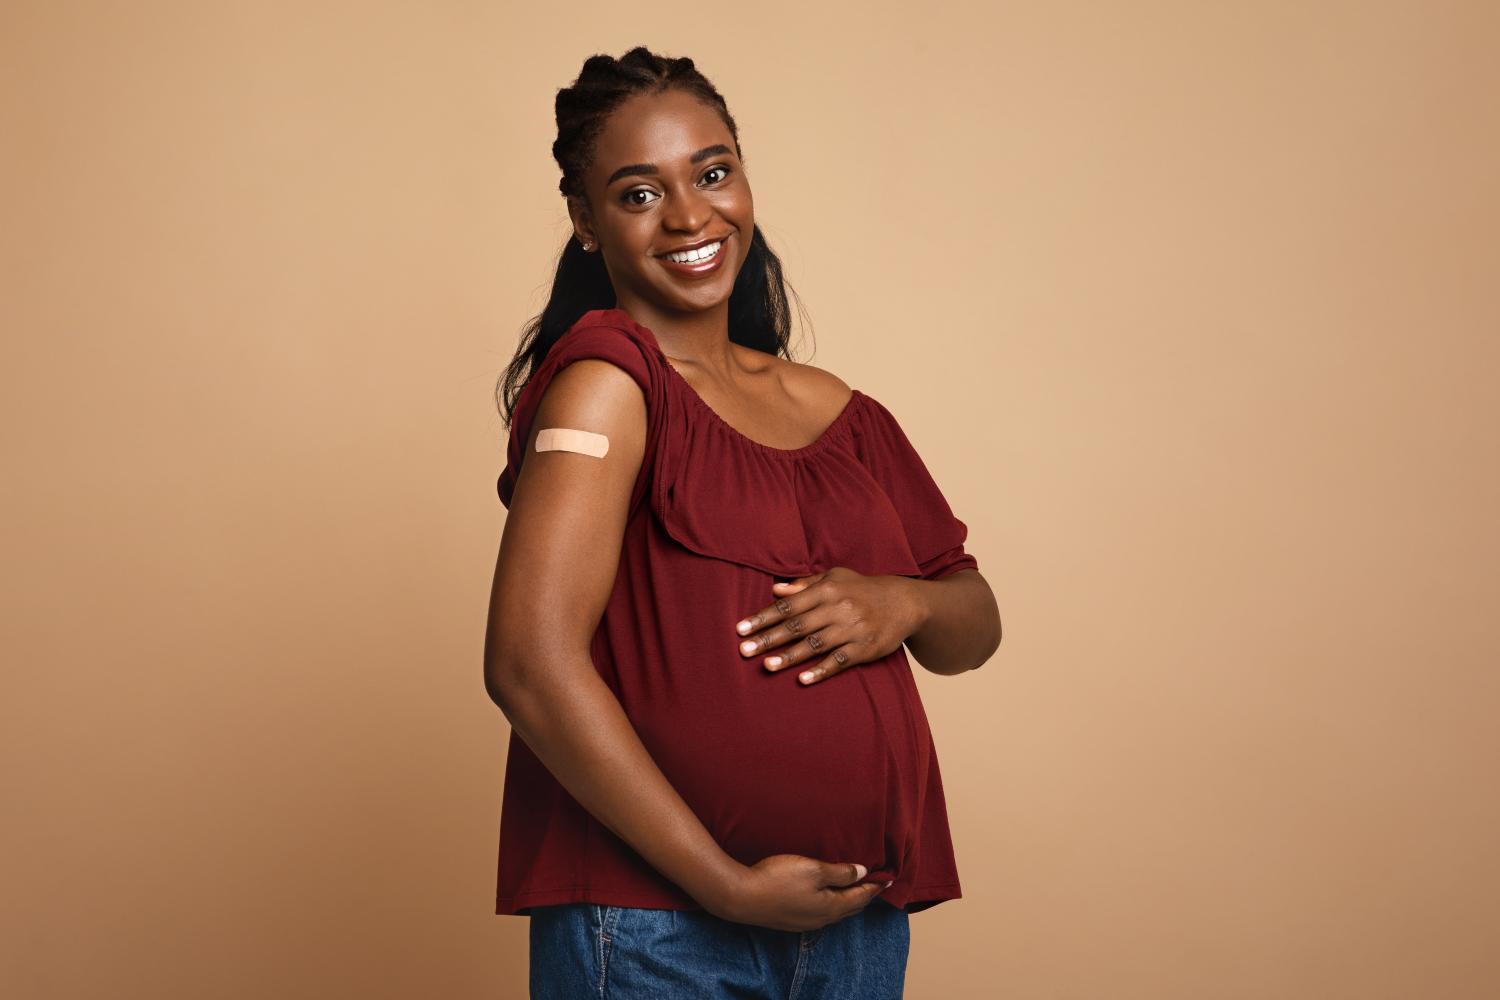 Pregnant women after receiving her vaccine